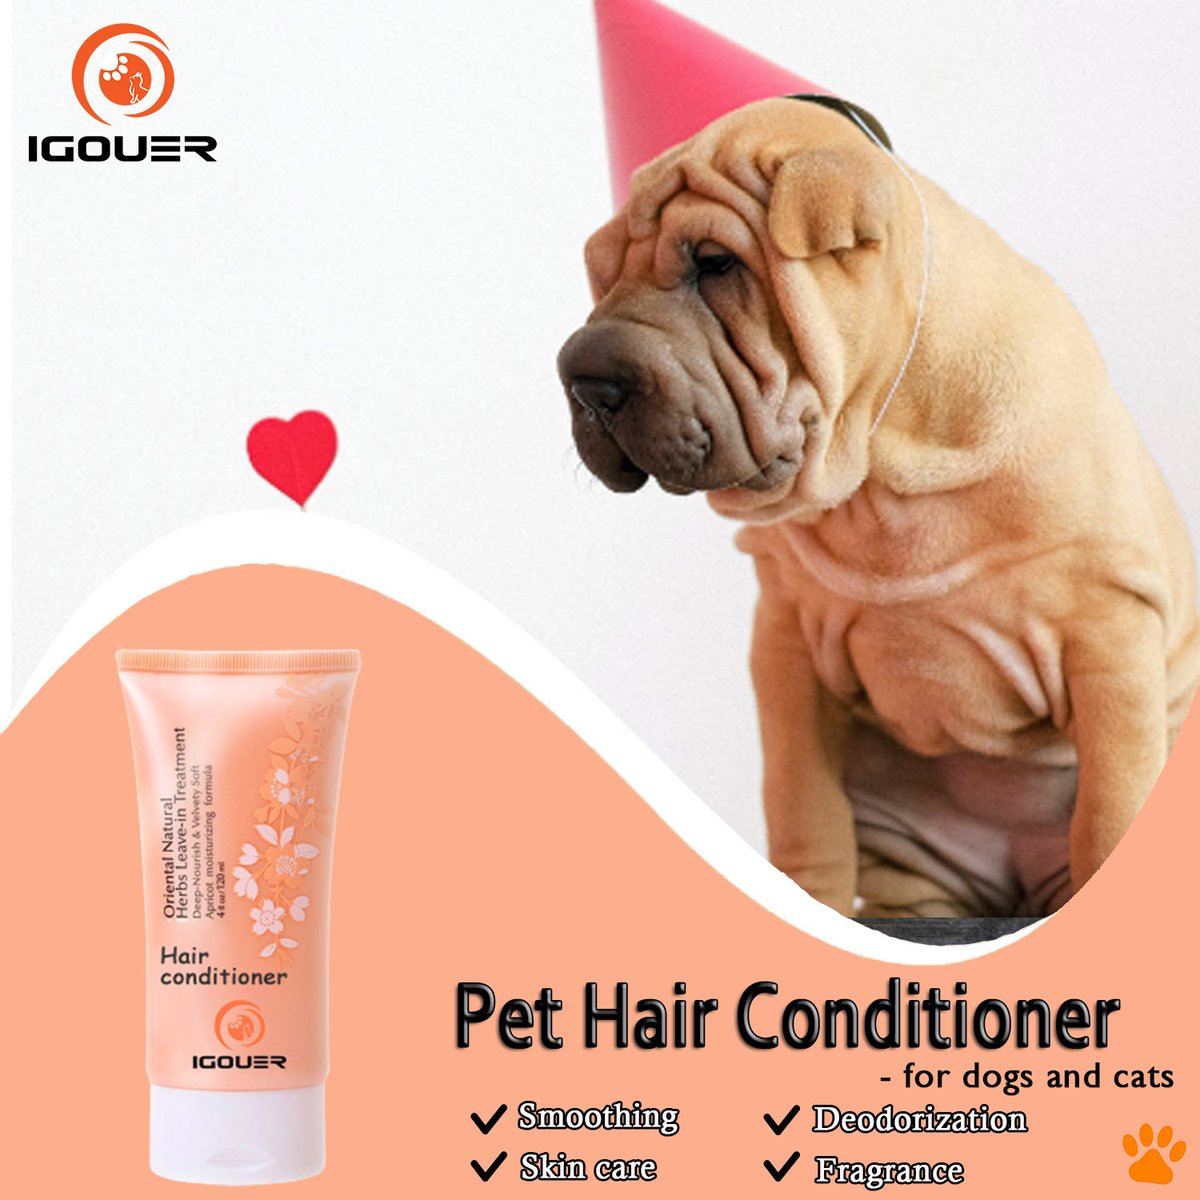 Pet Hair Conditioner🐾With smooth hair, beautiful hair, deodorant and skin care effect

#doghairconditioner 
#doghairconditioning 
#pethairconditioning 
#pethairconditioner 
#pethaircare 
#hairhealth
#cathaircare 
#pethealthcare 
#igouer
#igouerpetcare
#igouerpetproduct